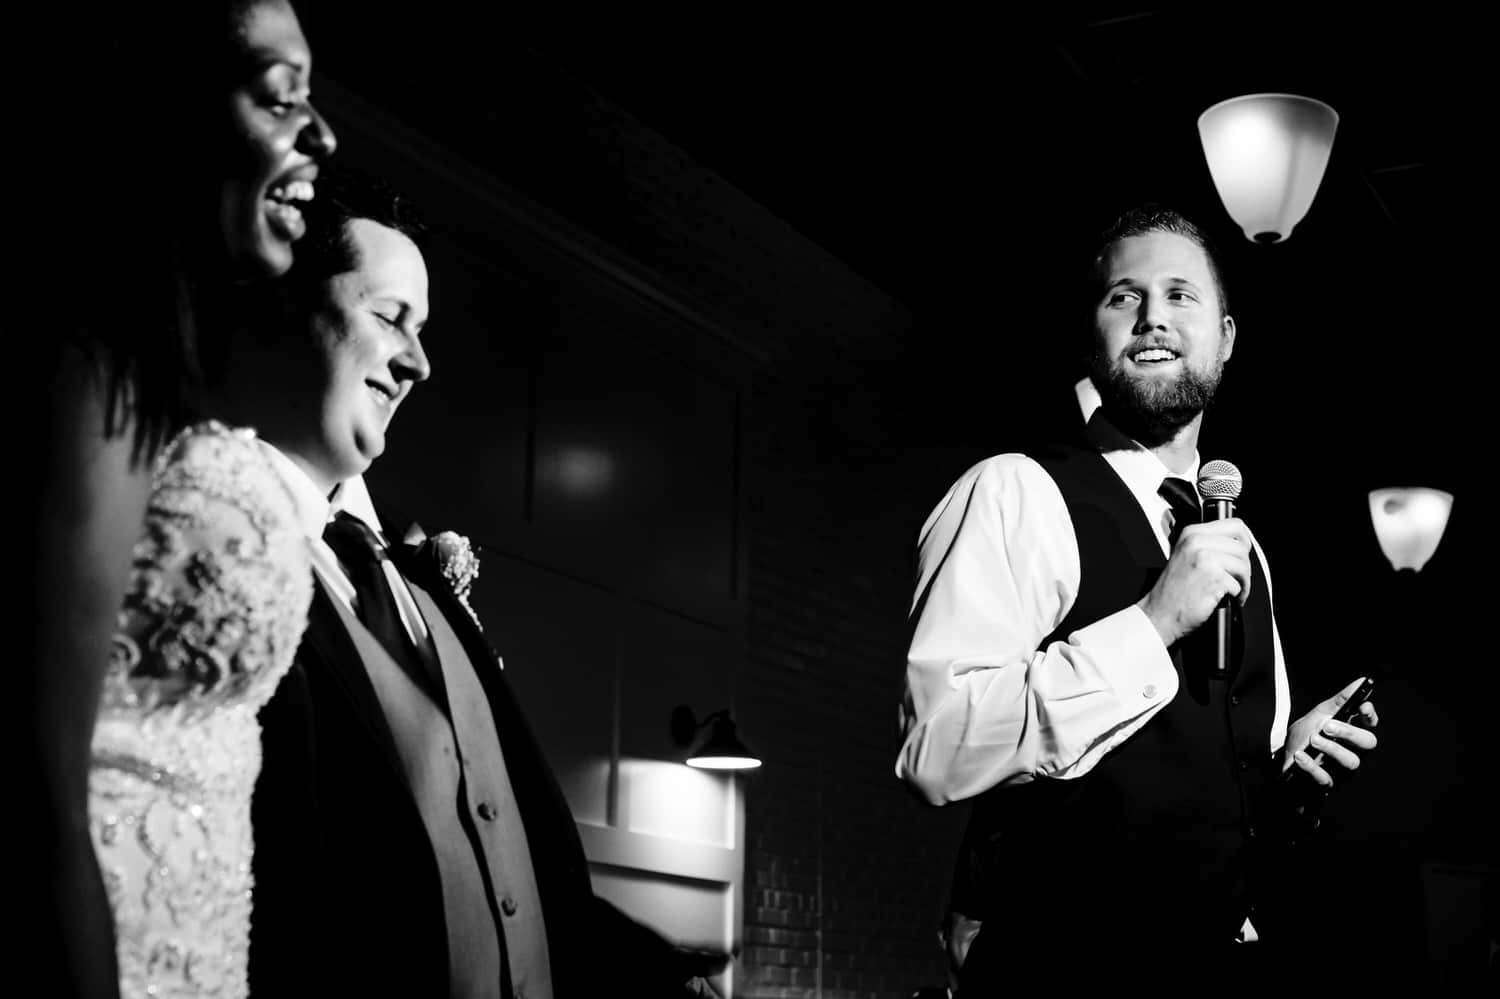 A candid black and white picture of a best man toasting the bride in the background, with the bride and groom embracing and listening in the foreground during their wedding reception at The Station in Kansas City.